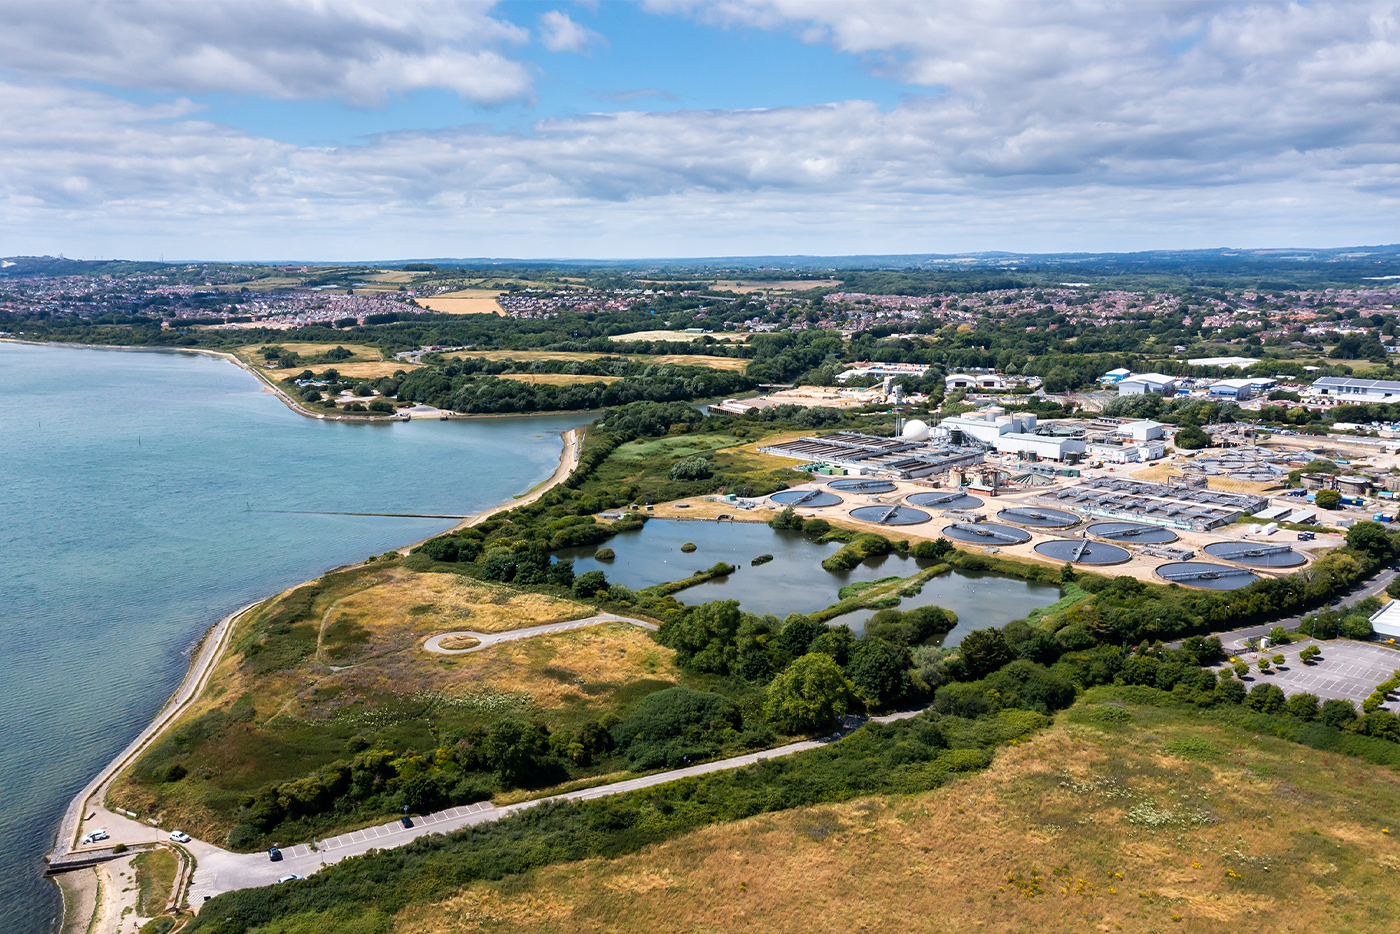 An aerial view of the Budds Farm Wastewater Treatment Works next to Langstone Harbour